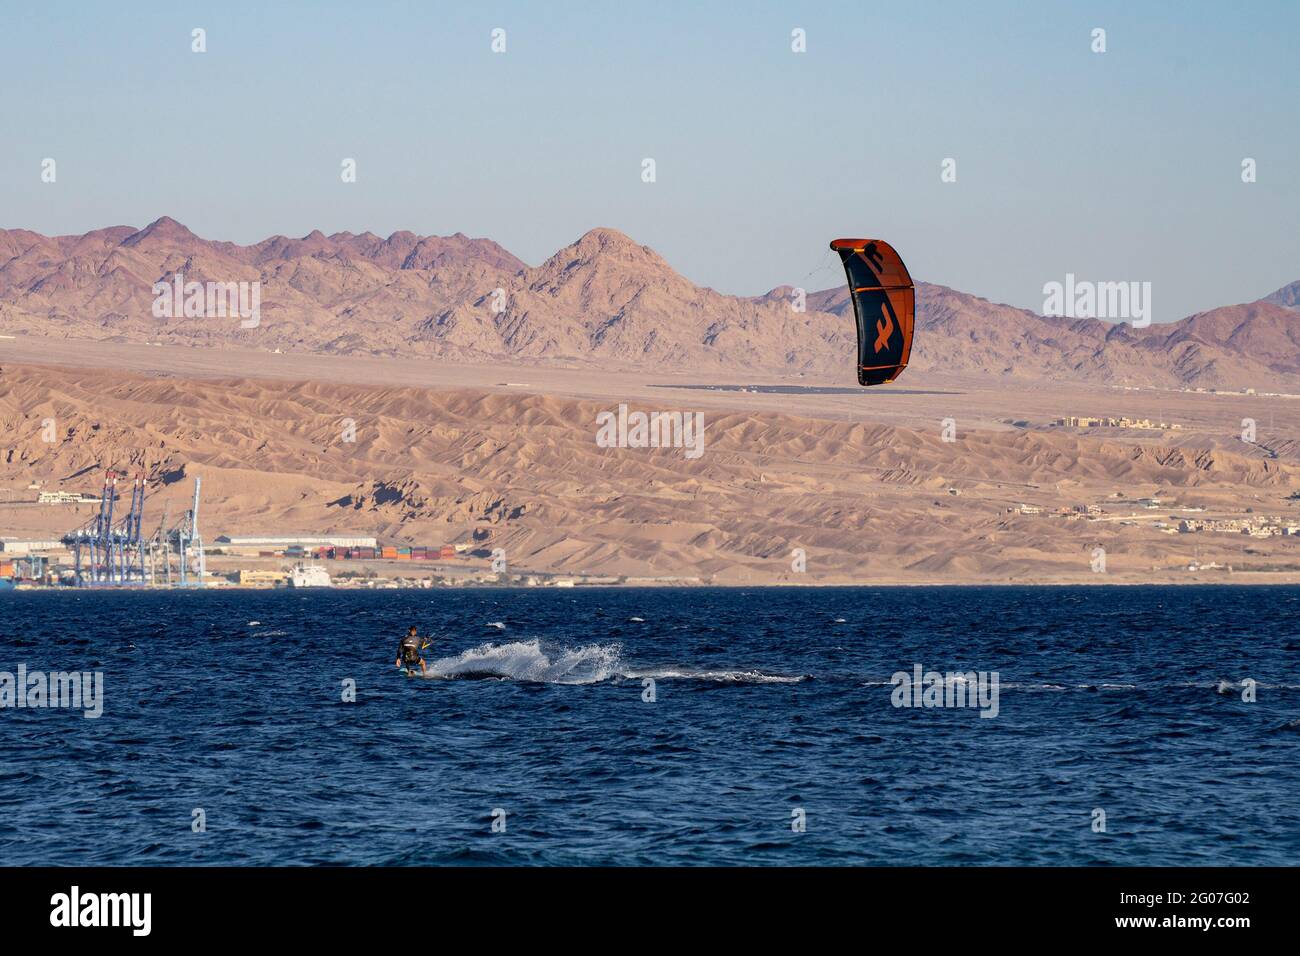 Eilat, Israel - May 24th, 2021: A man kite surfing off the shore of Eilat, Israel, with the jordanian Edom mountains in the hazy background. Stock Photo